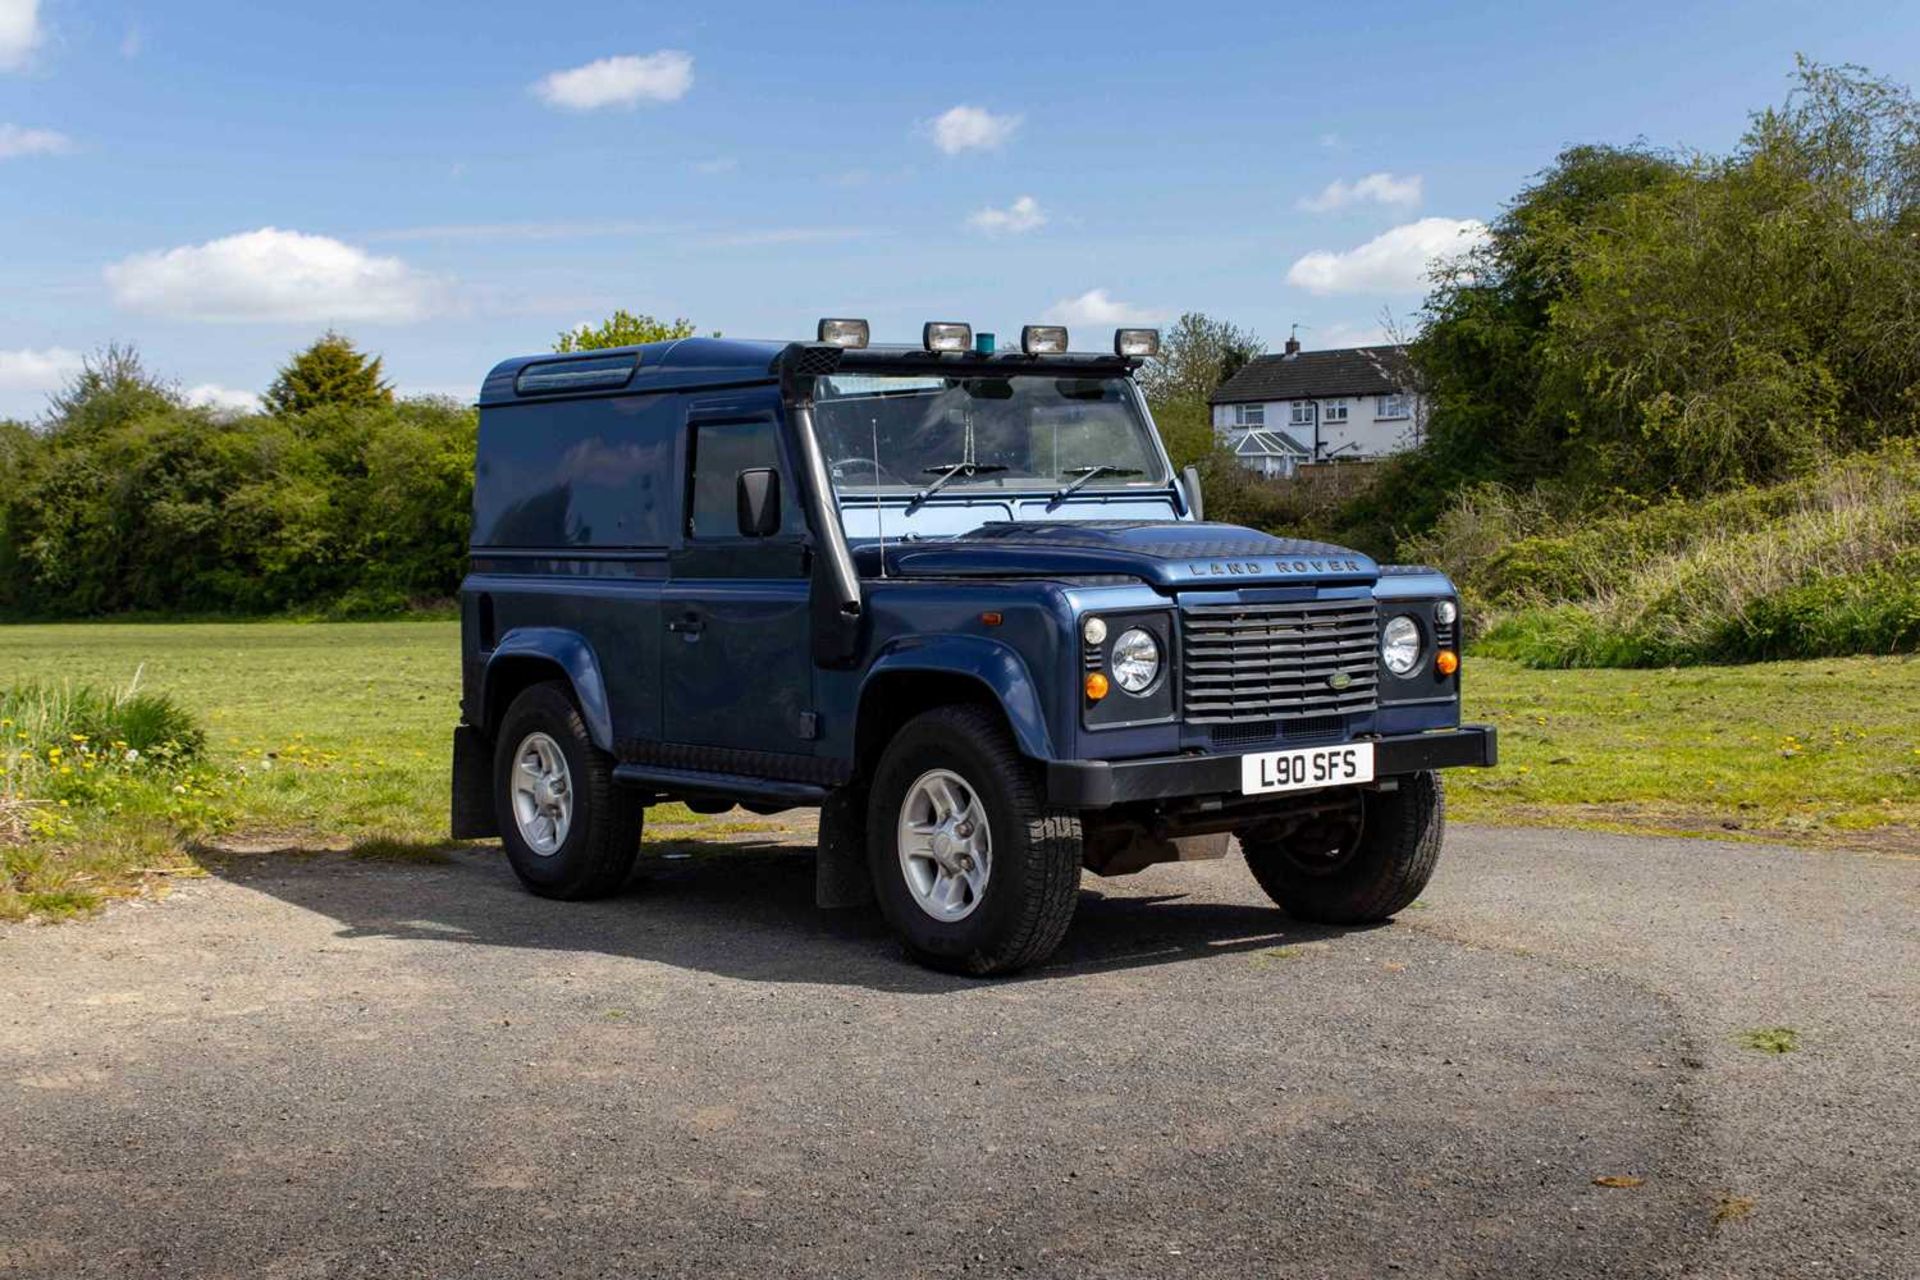 2007 Land Rover Defender 90 County  Powered by the 2.4-litre TDCi unit and features numerous tastefu - Image 8 of 76